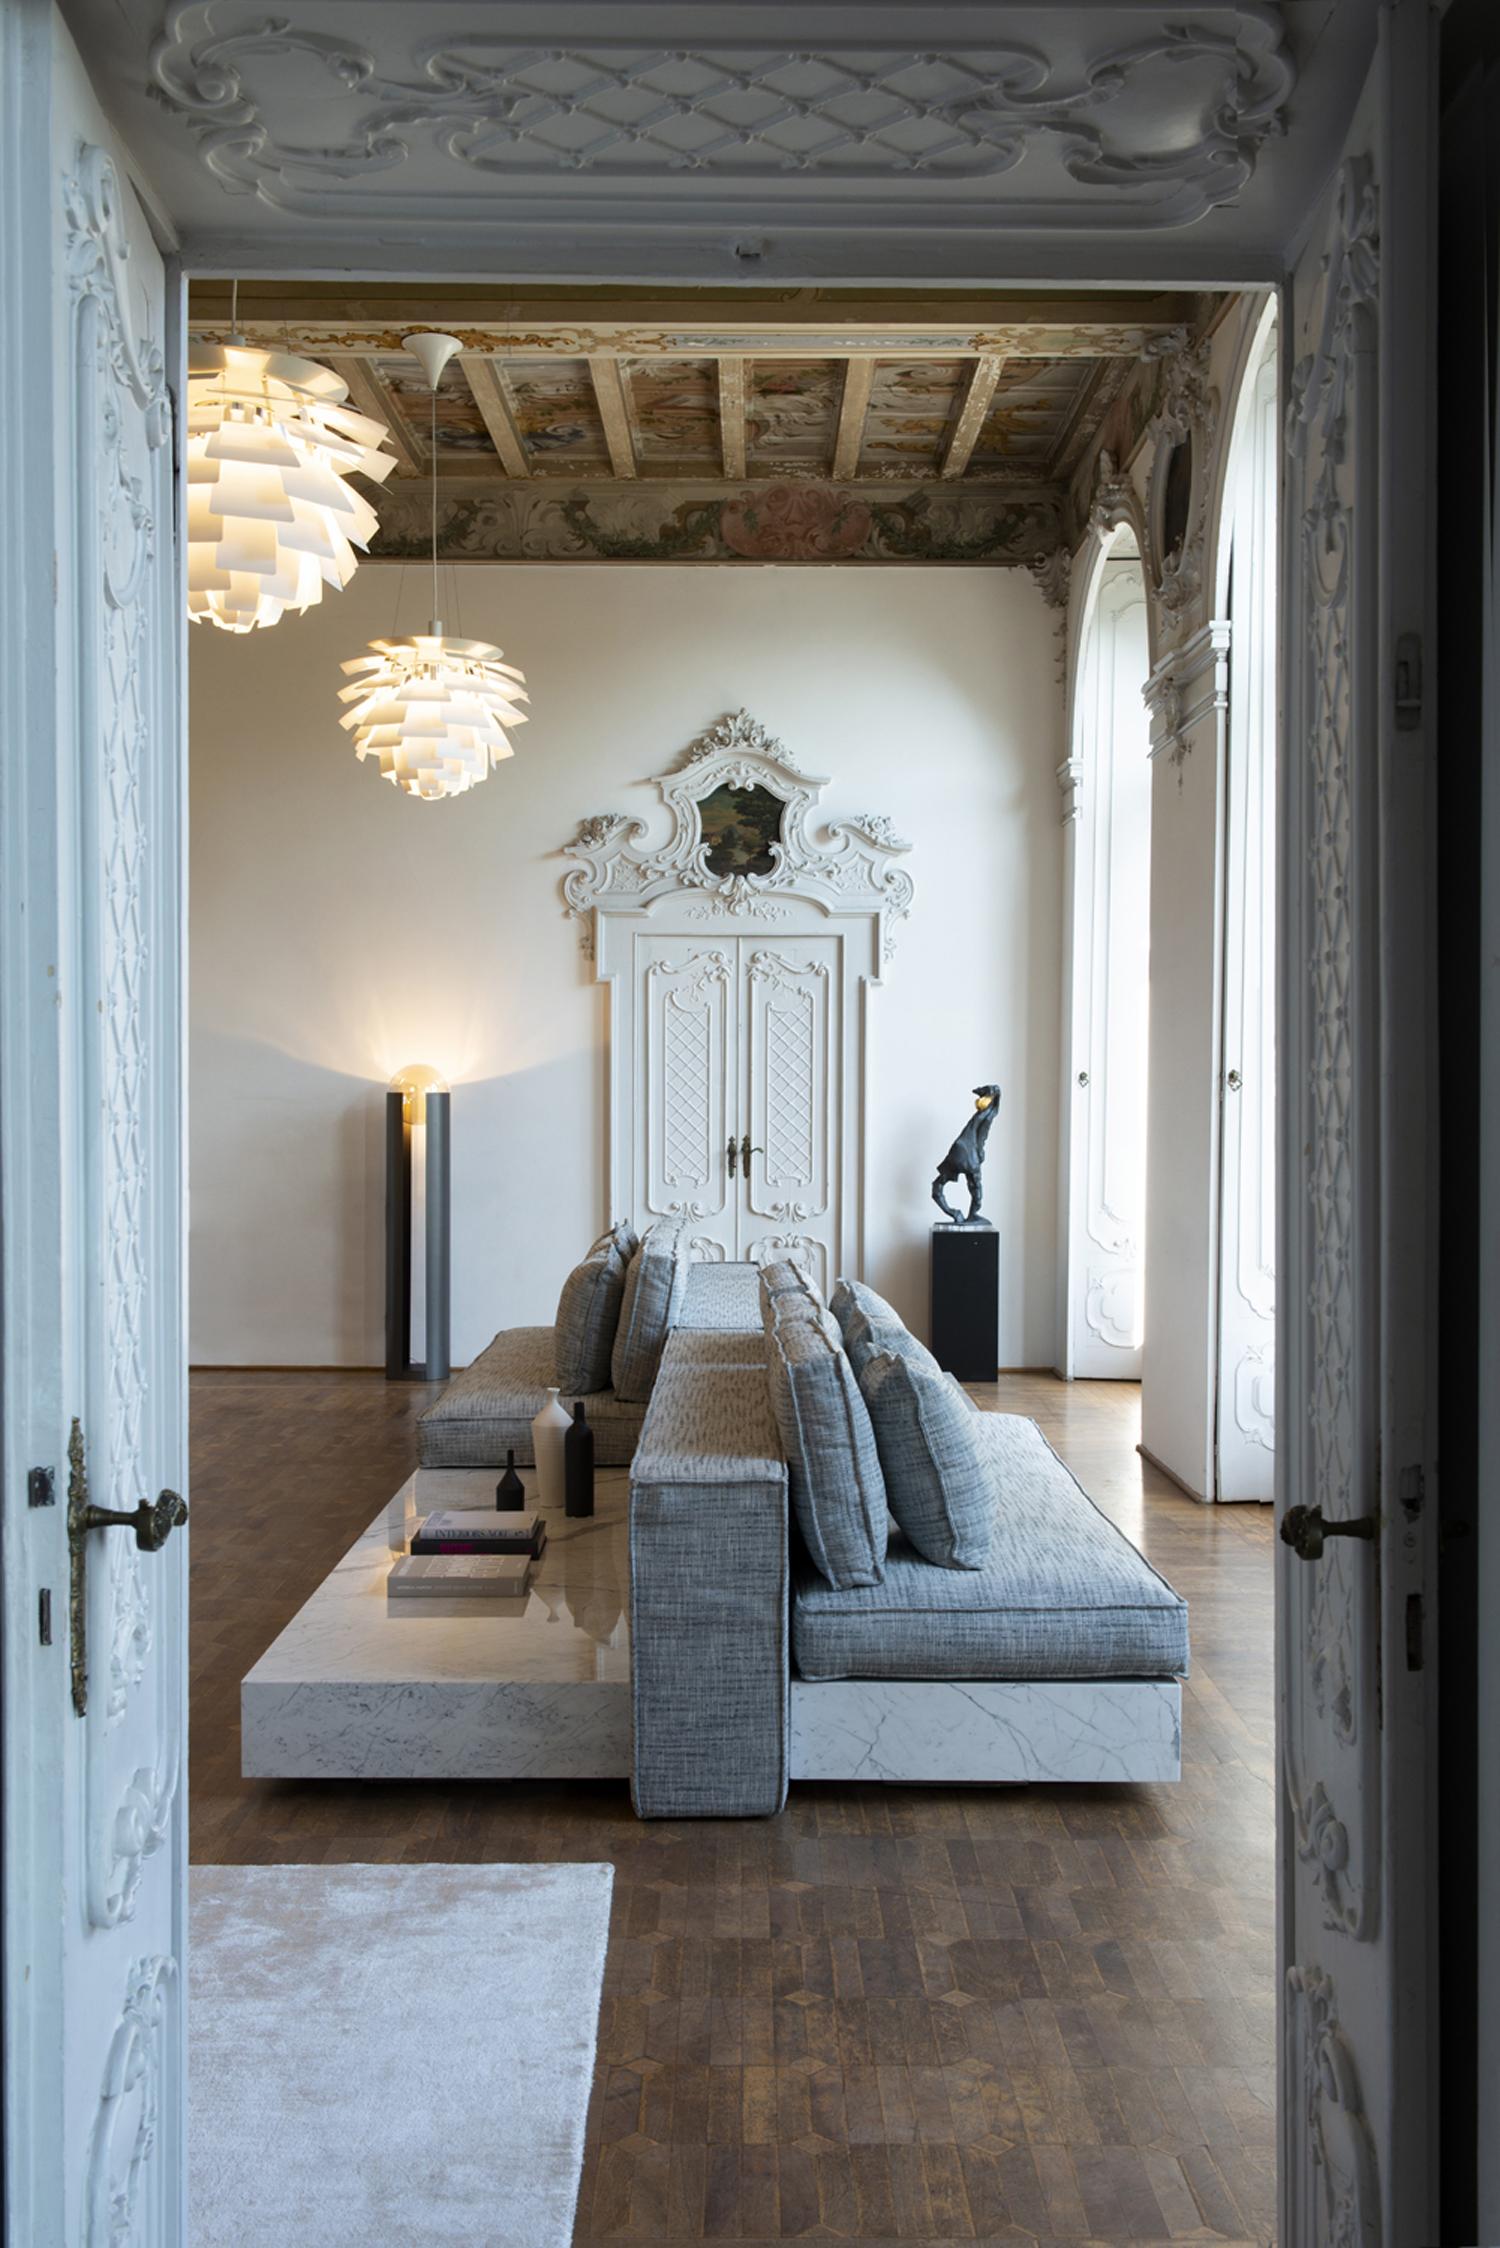 Infinity sofa is a sectional sofa made with Carrara marble.? This is a rare quality of marble that is extracted from the Bettogli quarries in North Tuscany where it gets the name from.
The concept behind Infinity Sofa is based on multifunction and